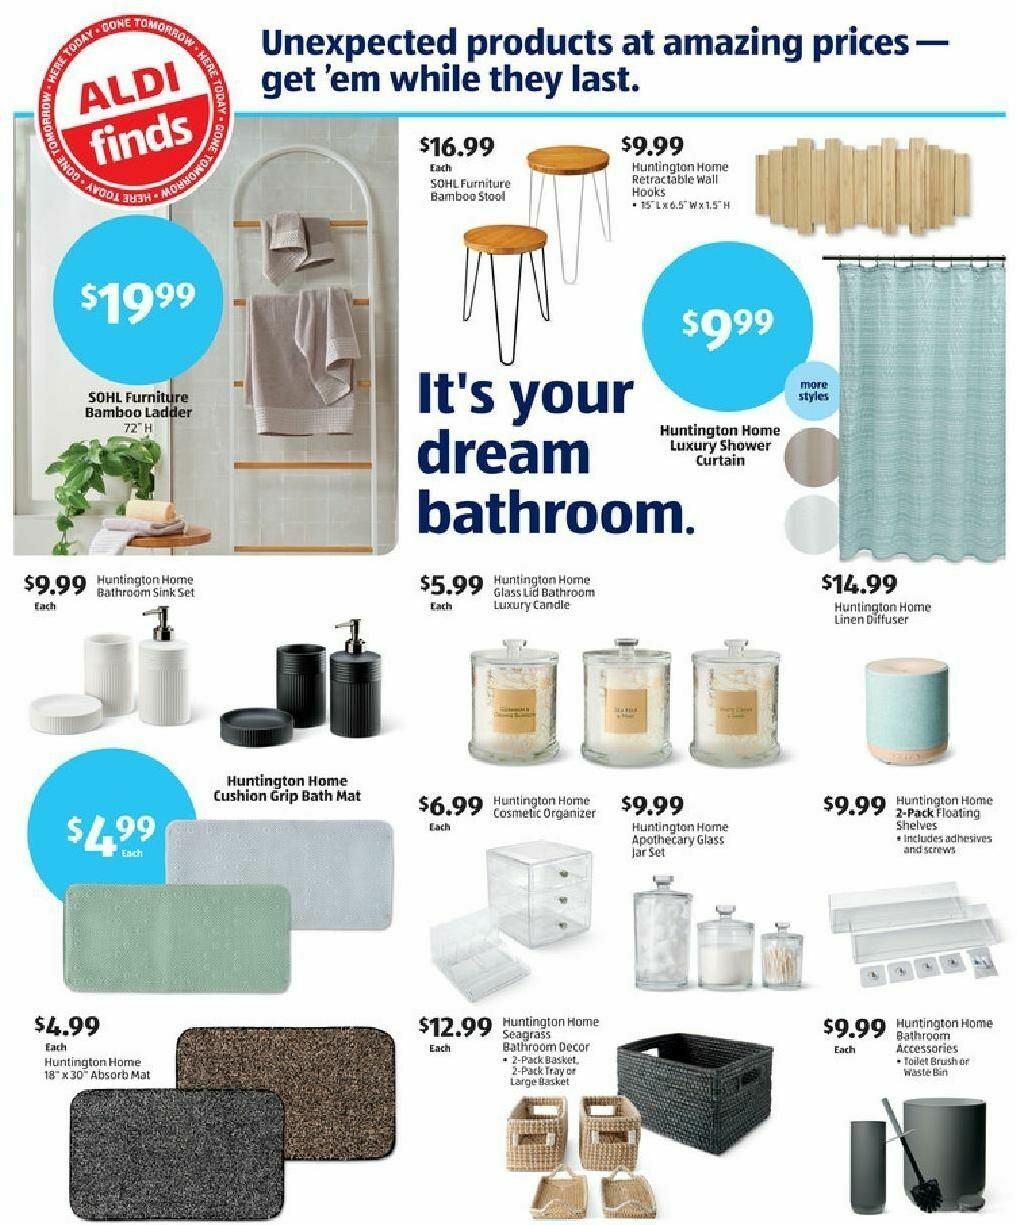 ALDI Weekly Ad from January 3